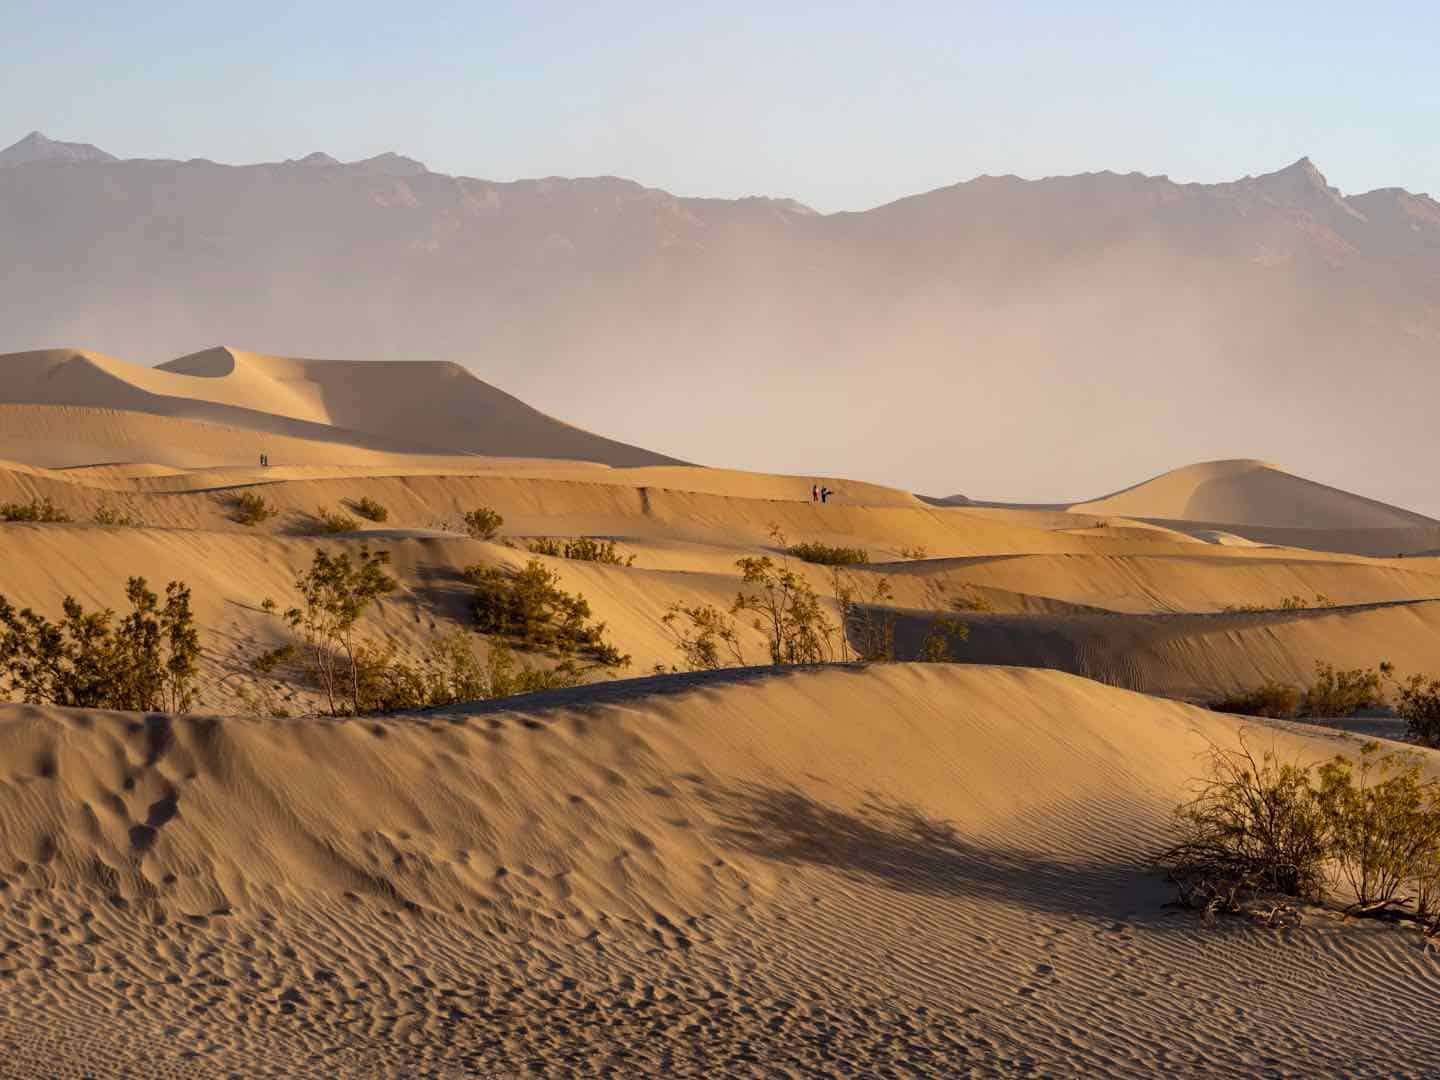 The beige sand dunes undulate across the landscape at Mesquite Dunes in Death Valley.